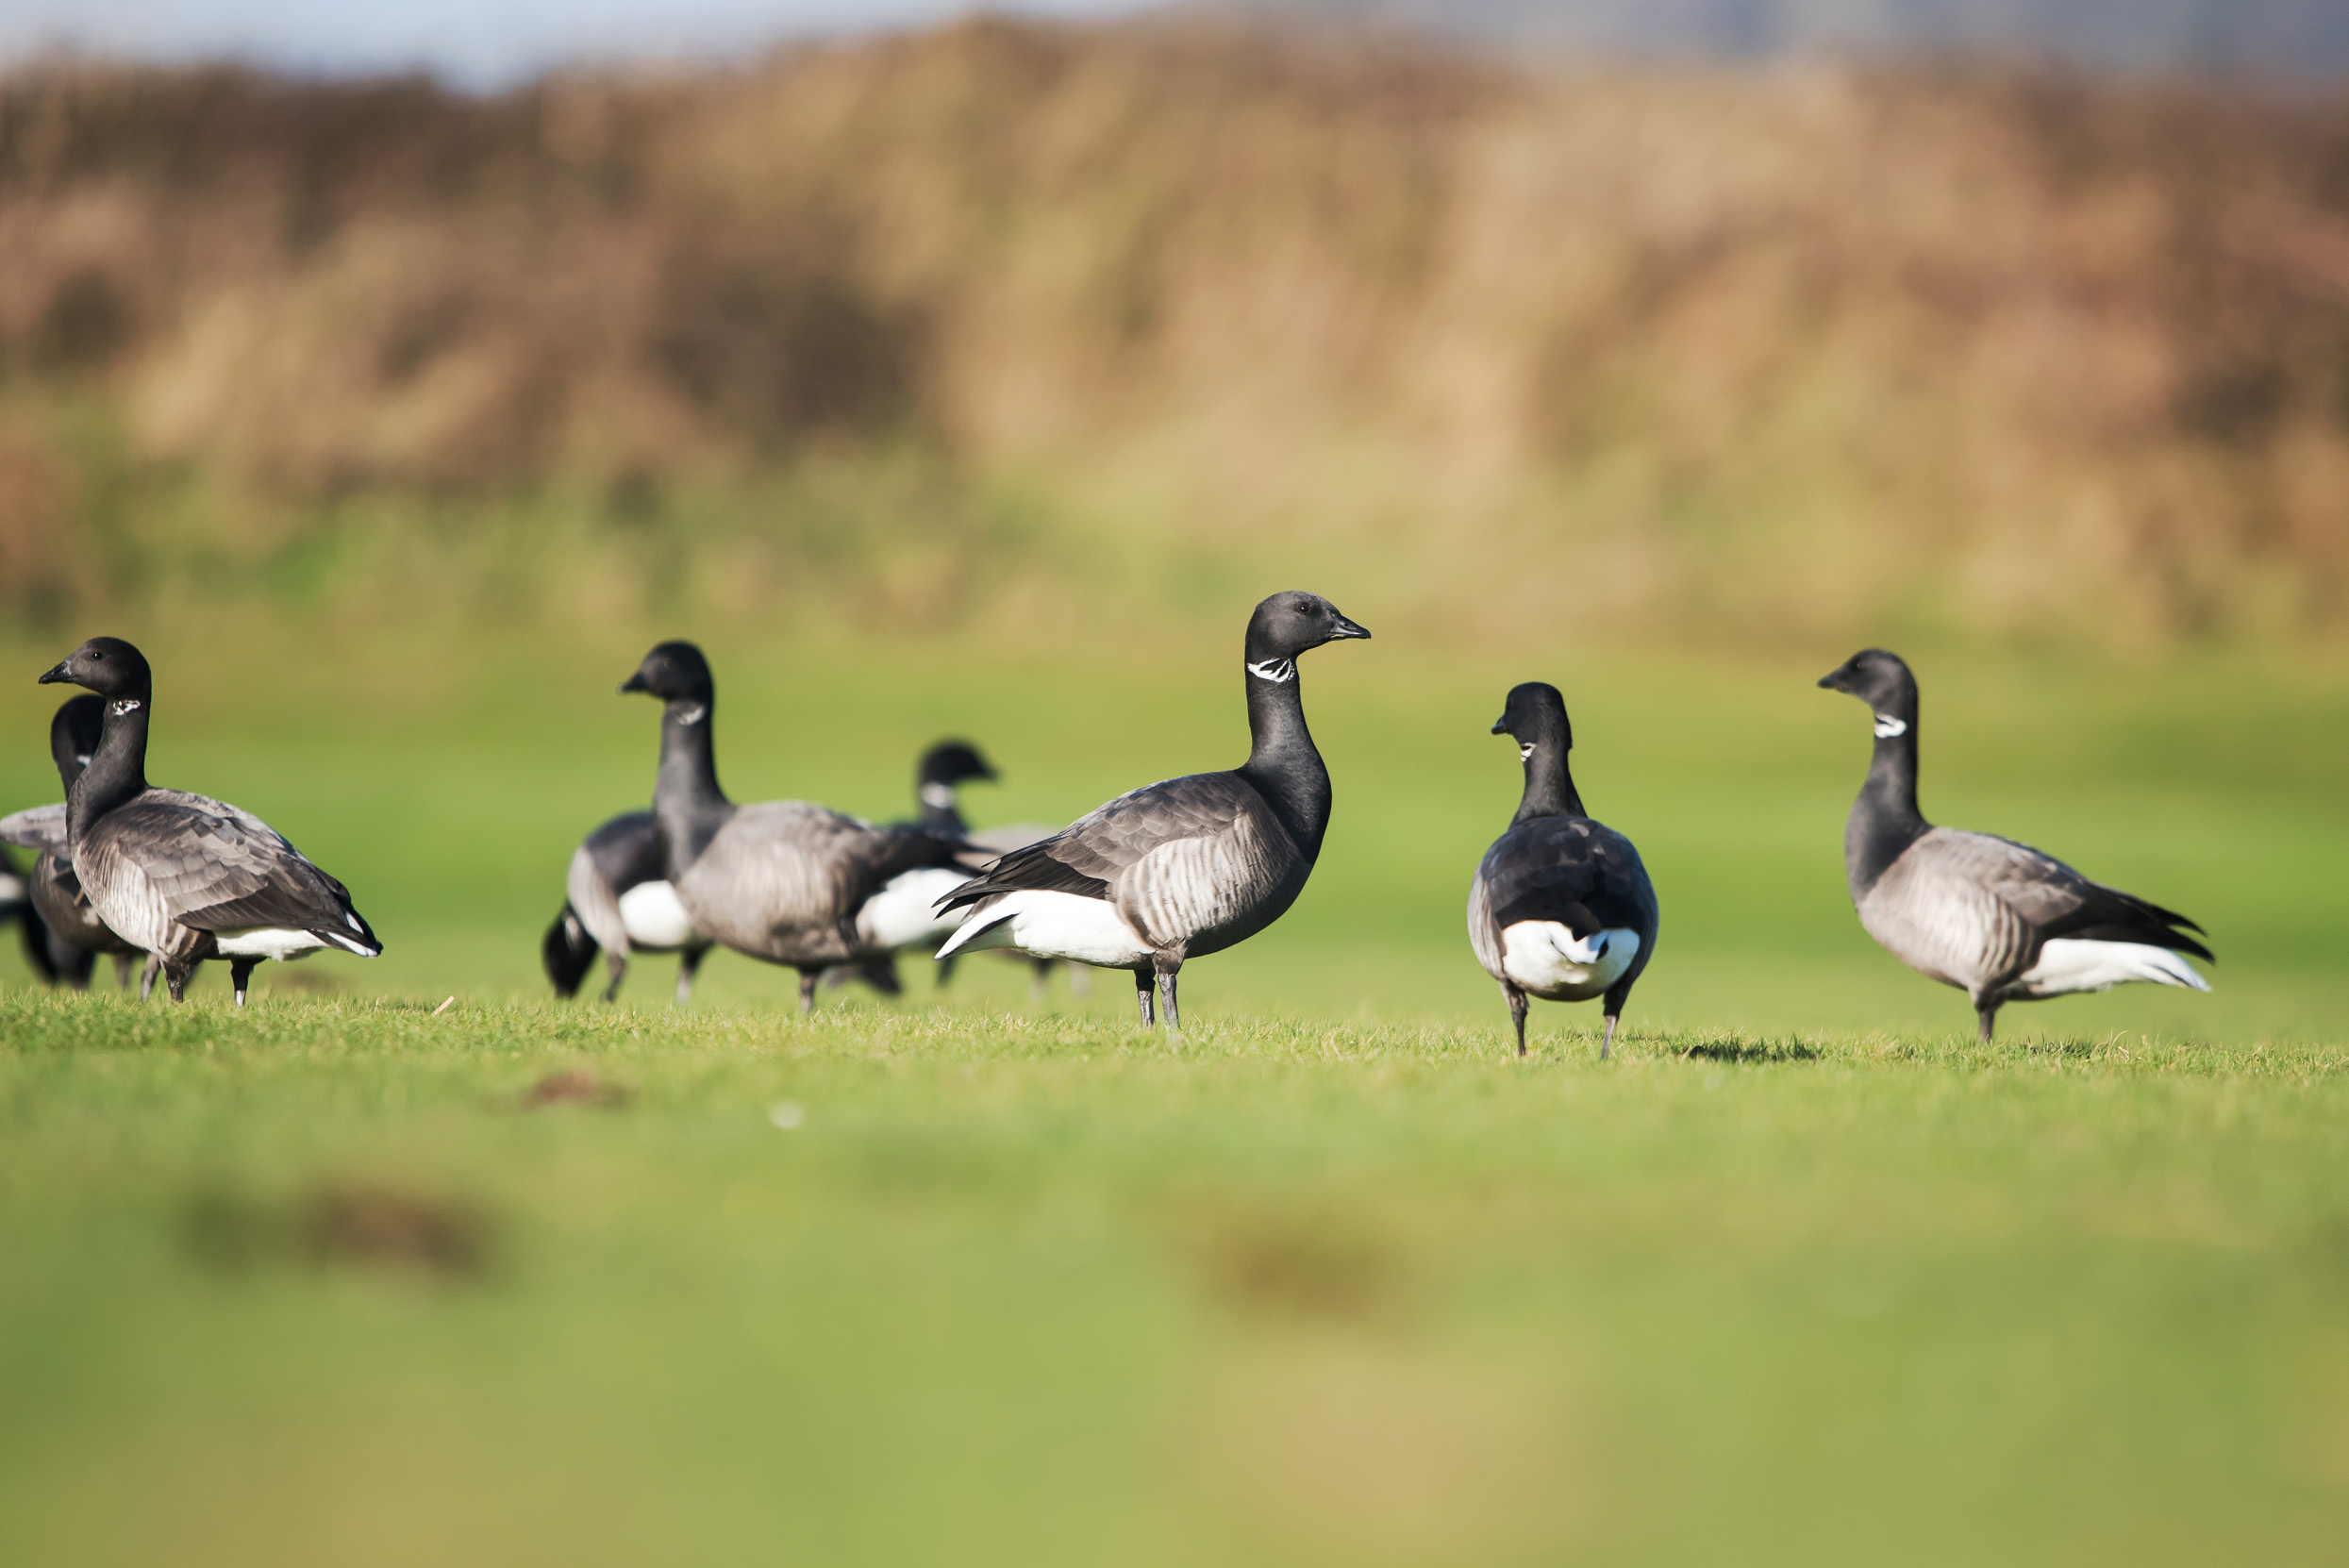 Eight Brent Geese standing together in a field of grass.